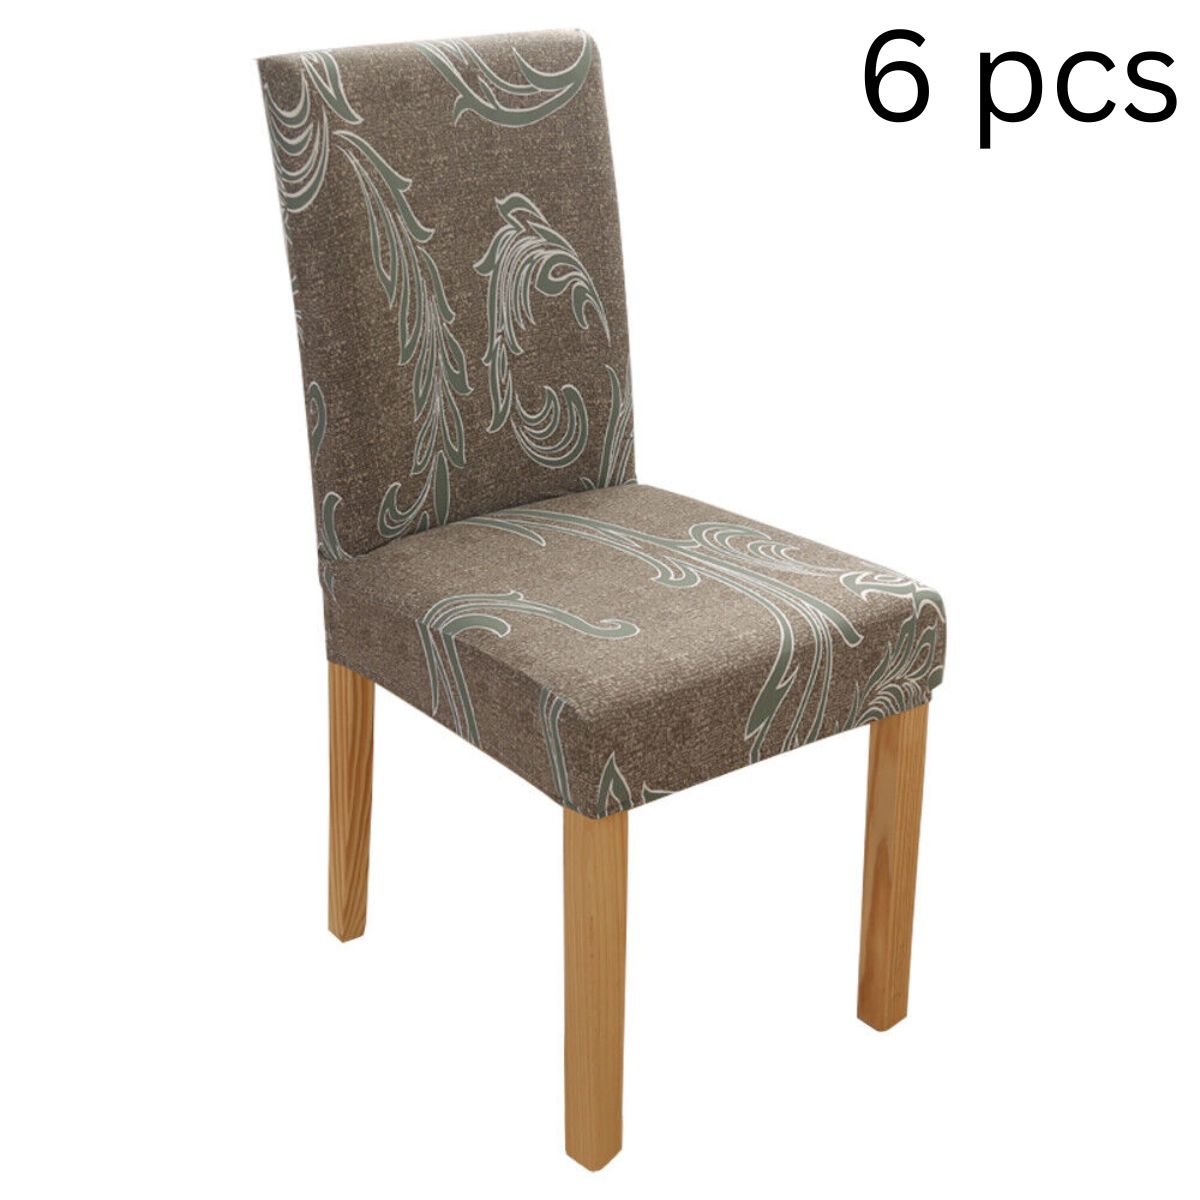 Printed Chair Covers 6 pcs